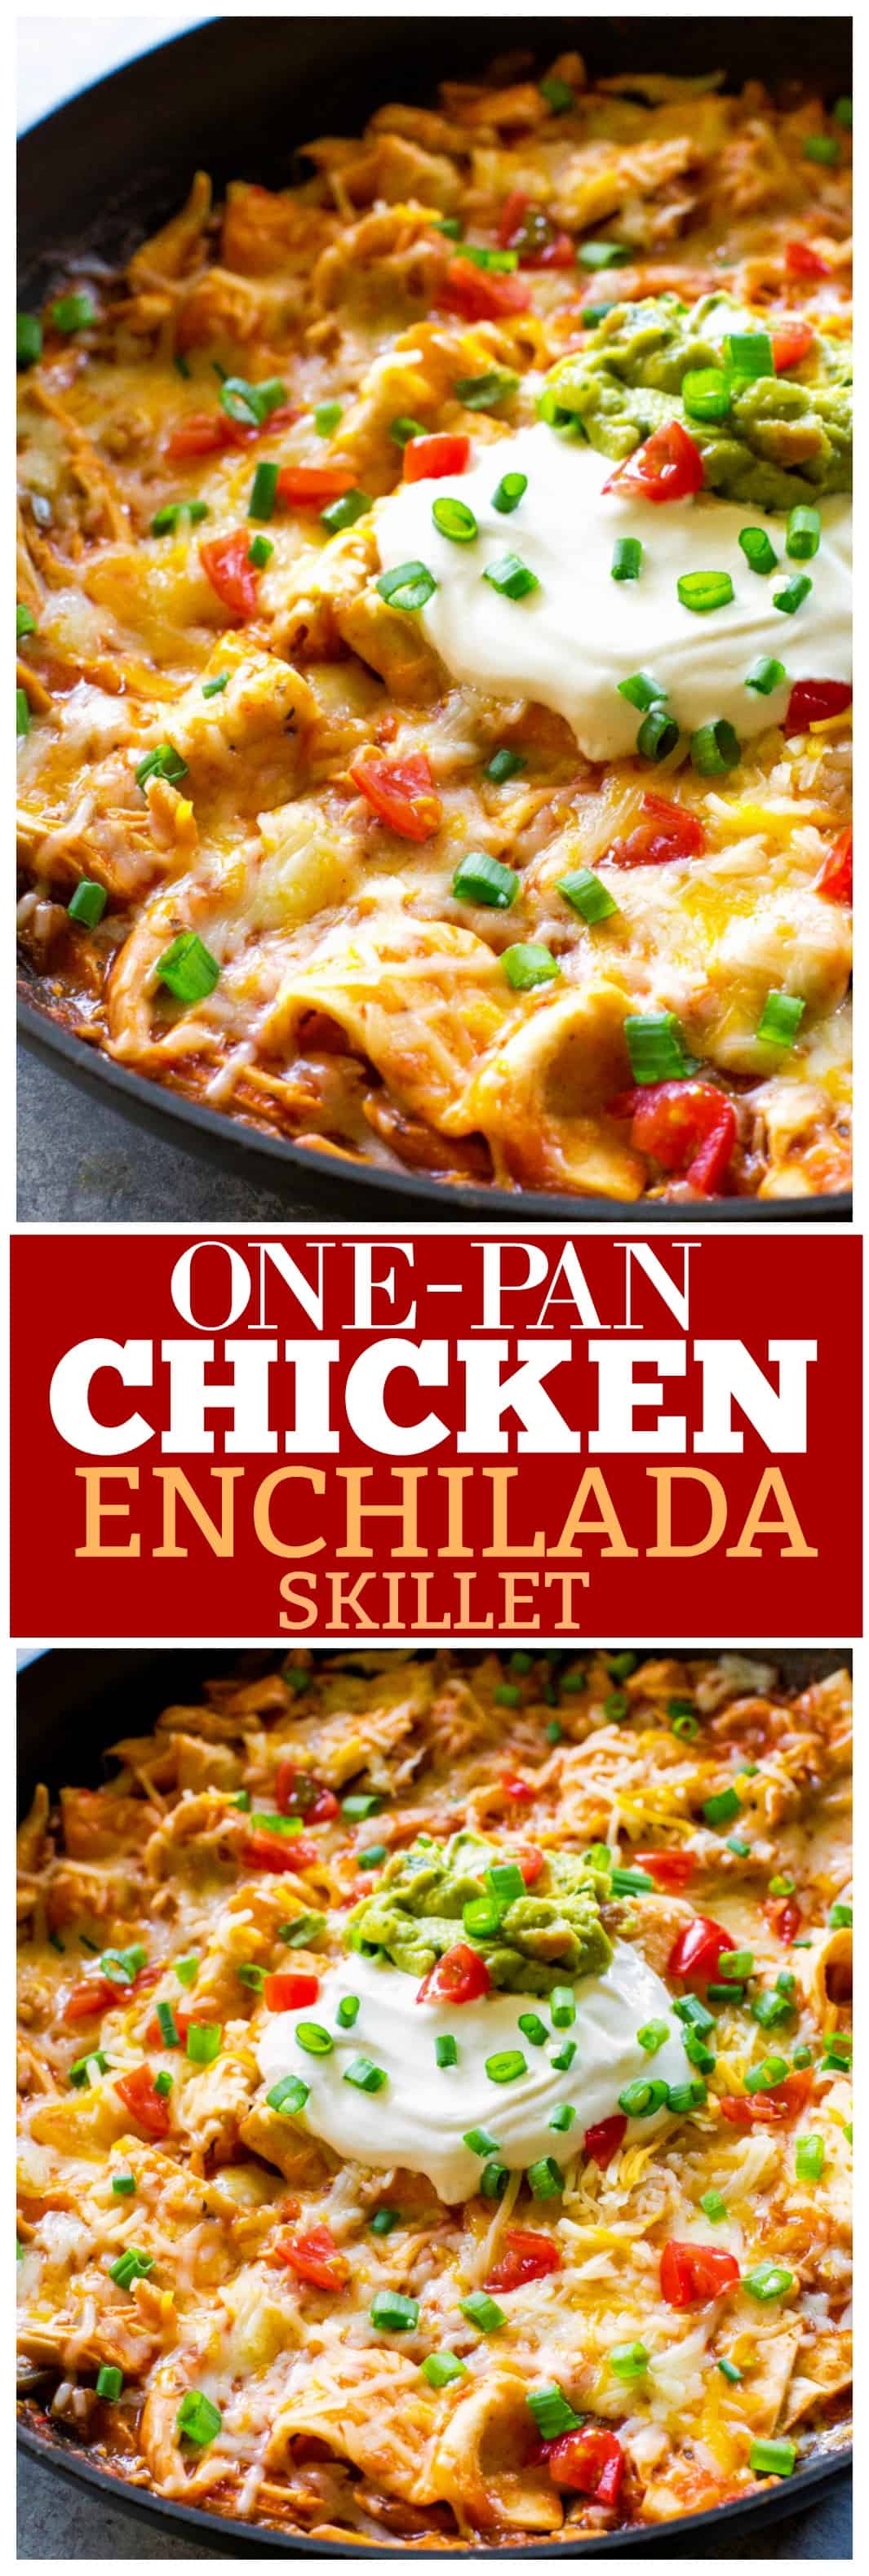 One Pan Chicken Enchilada Skillet enchilada sauce, chicken, tortillas, and salsa topped with sour cream and green onions